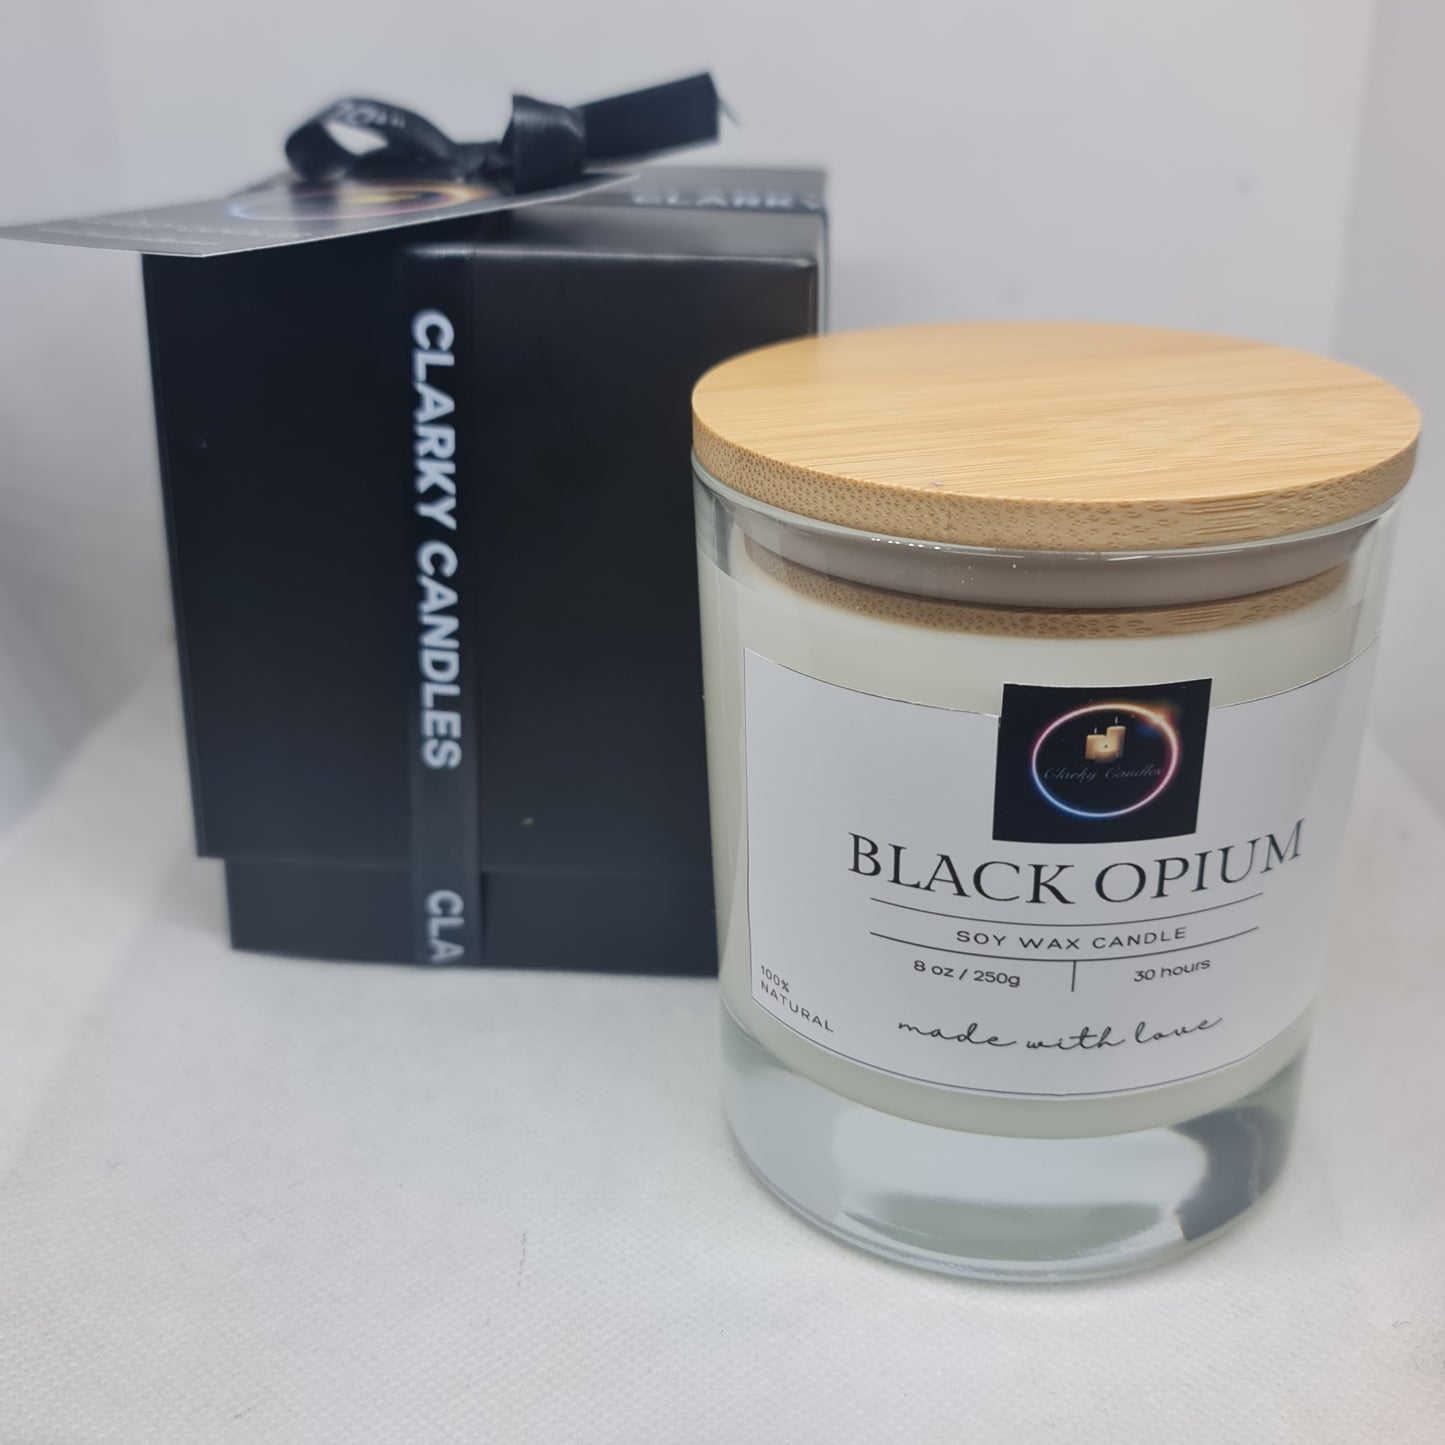 Black Opium - Scented Soy Wax Candle